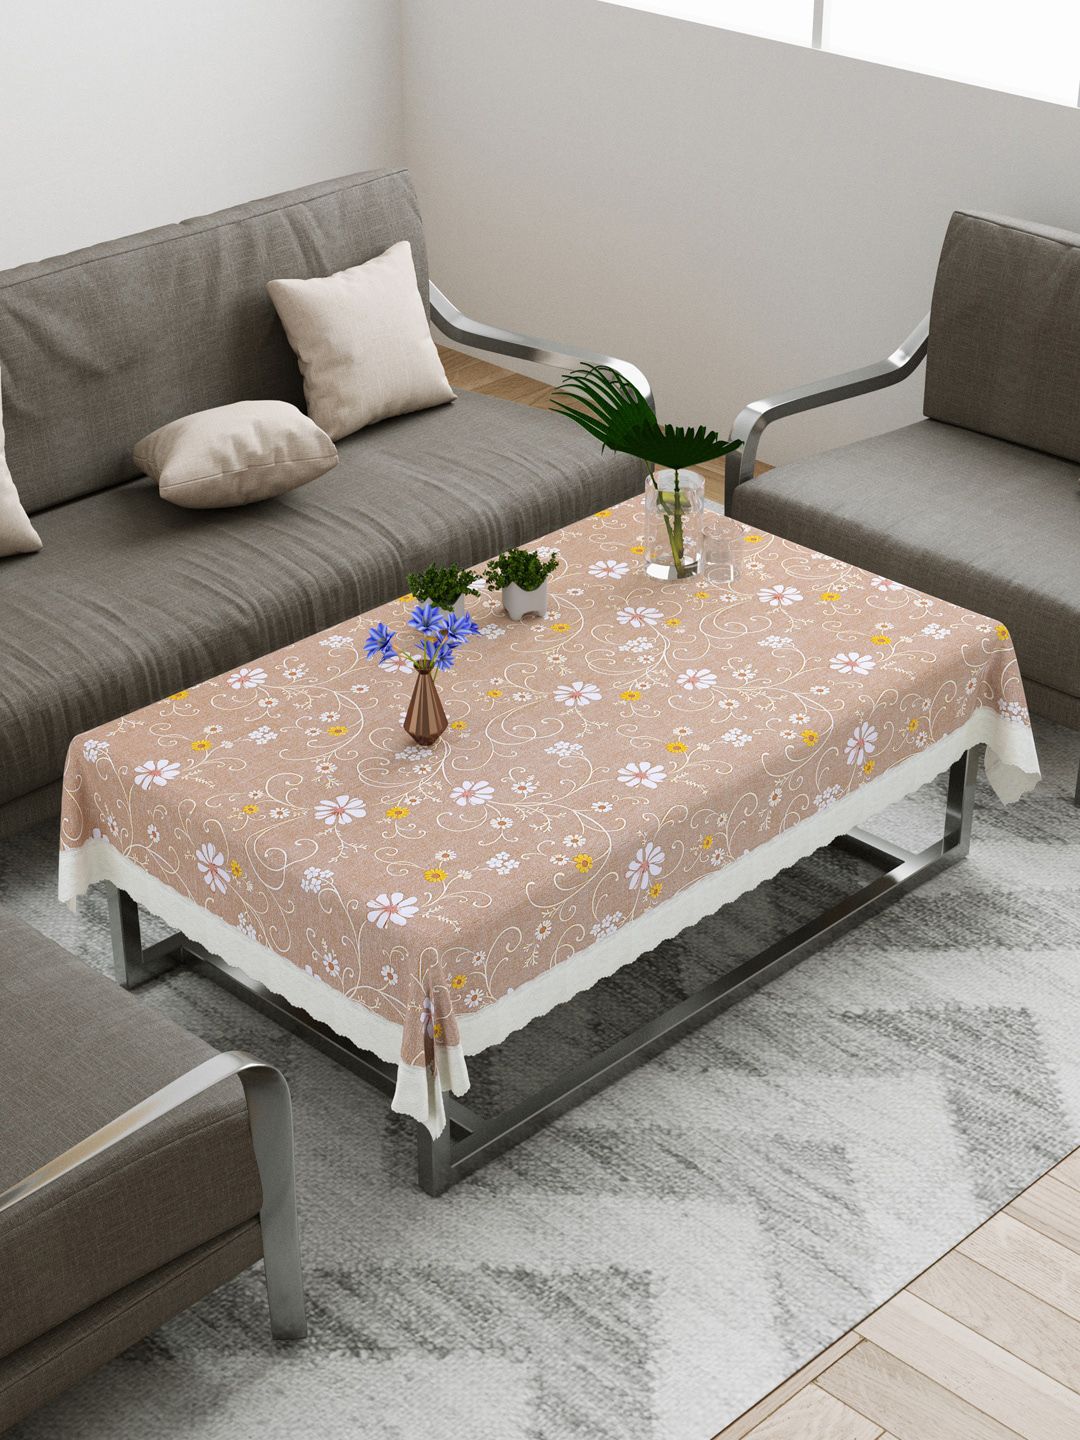 DREAM WEAVERZ Beige & White Floral Printed 4-Seater Table Cover Price in India